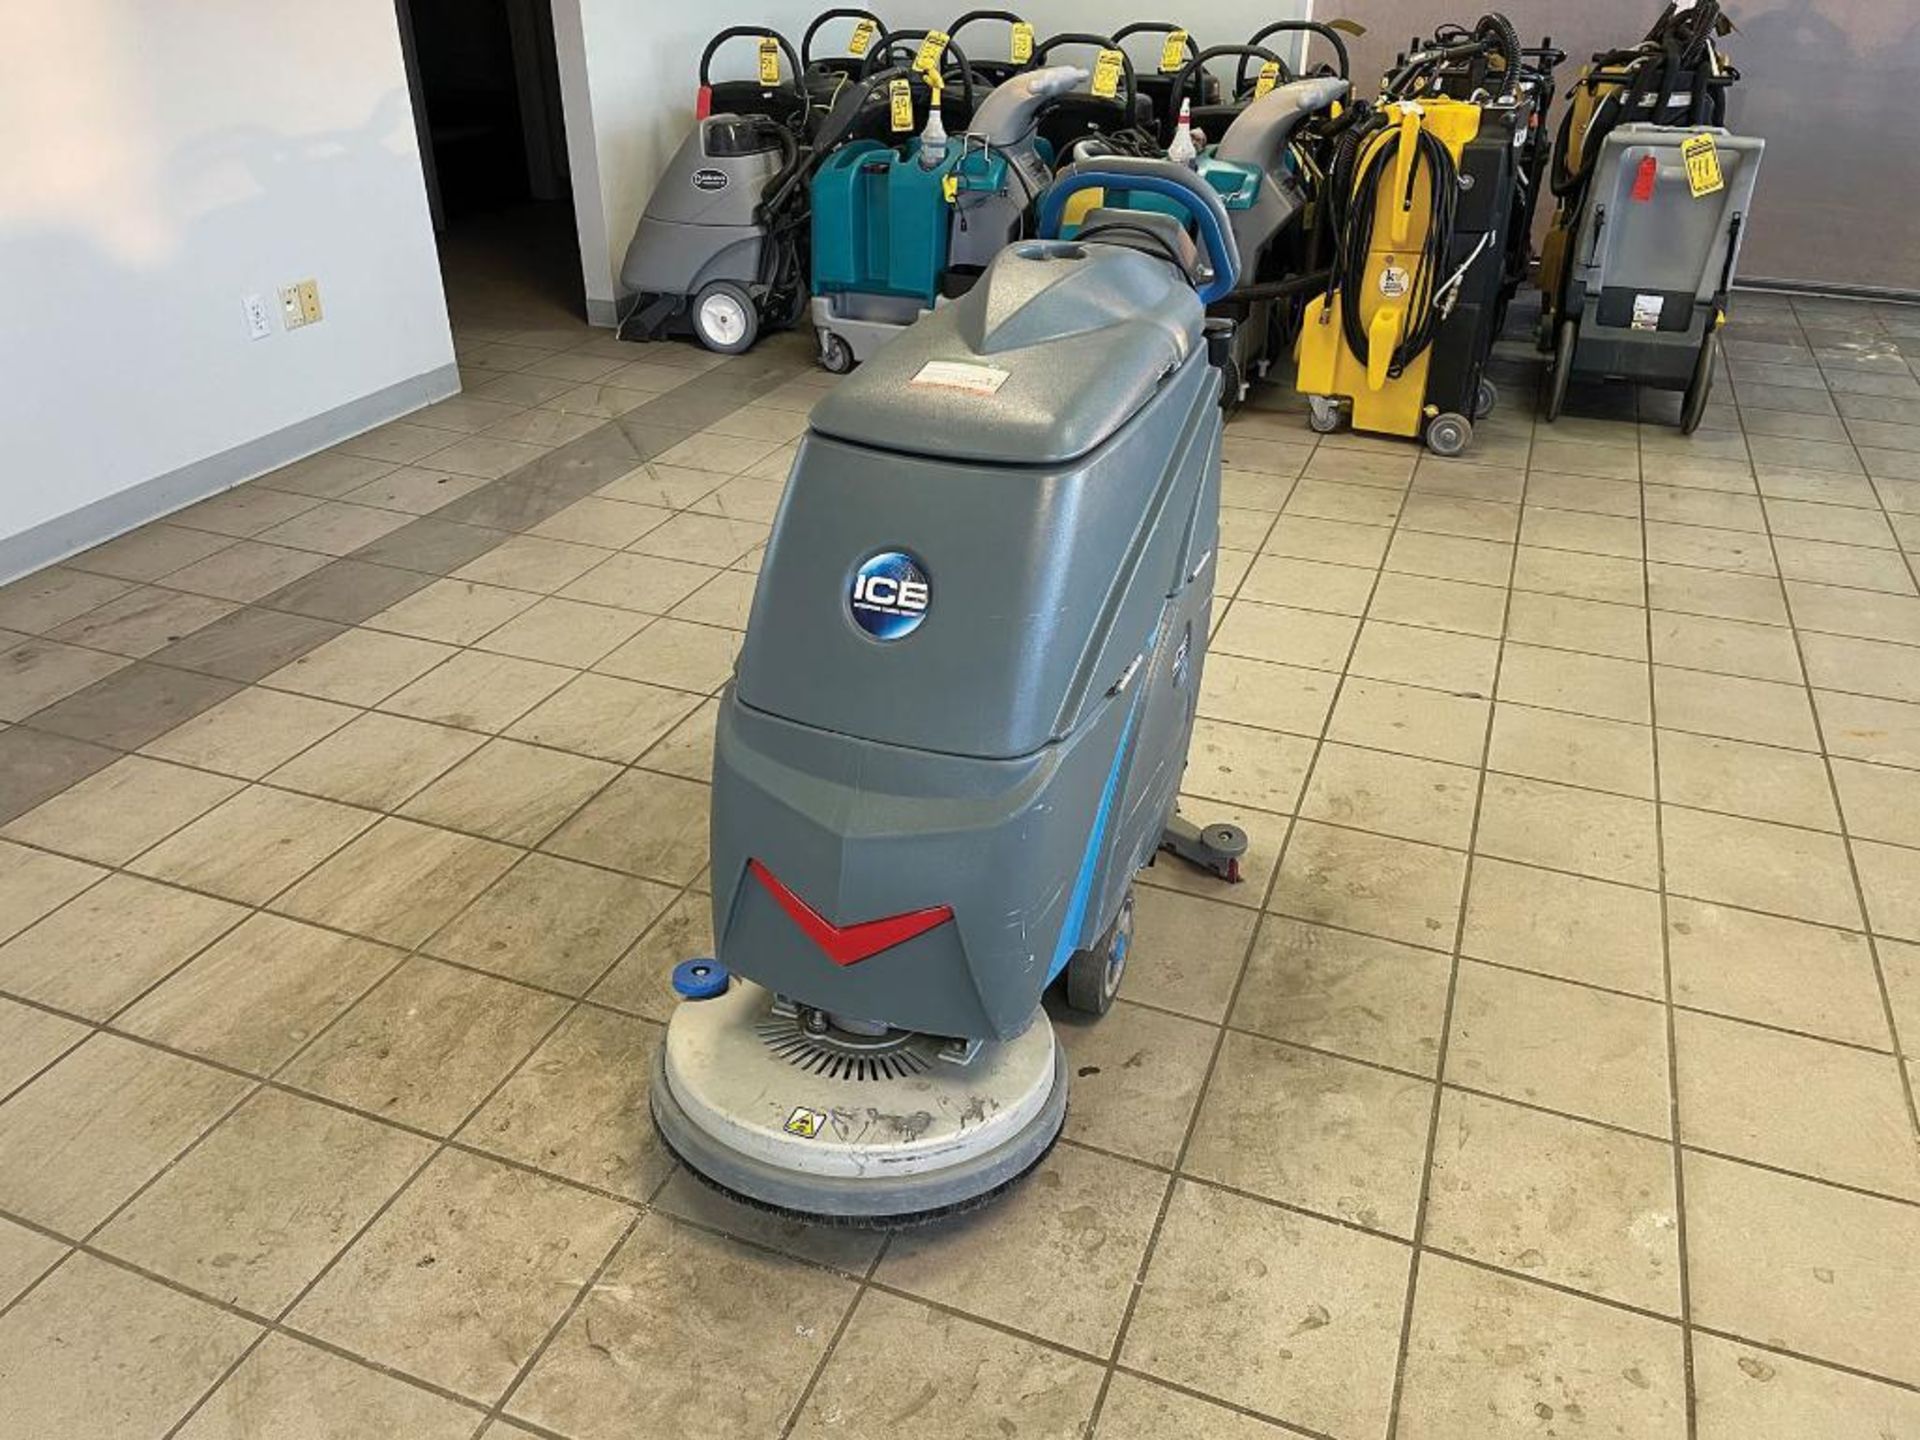 ICE WALK-BEHIND AUTOMATIC SCRUBBER, MODEL: I20NB, S/N: 000616, 24-VOLT - Image 2 of 5